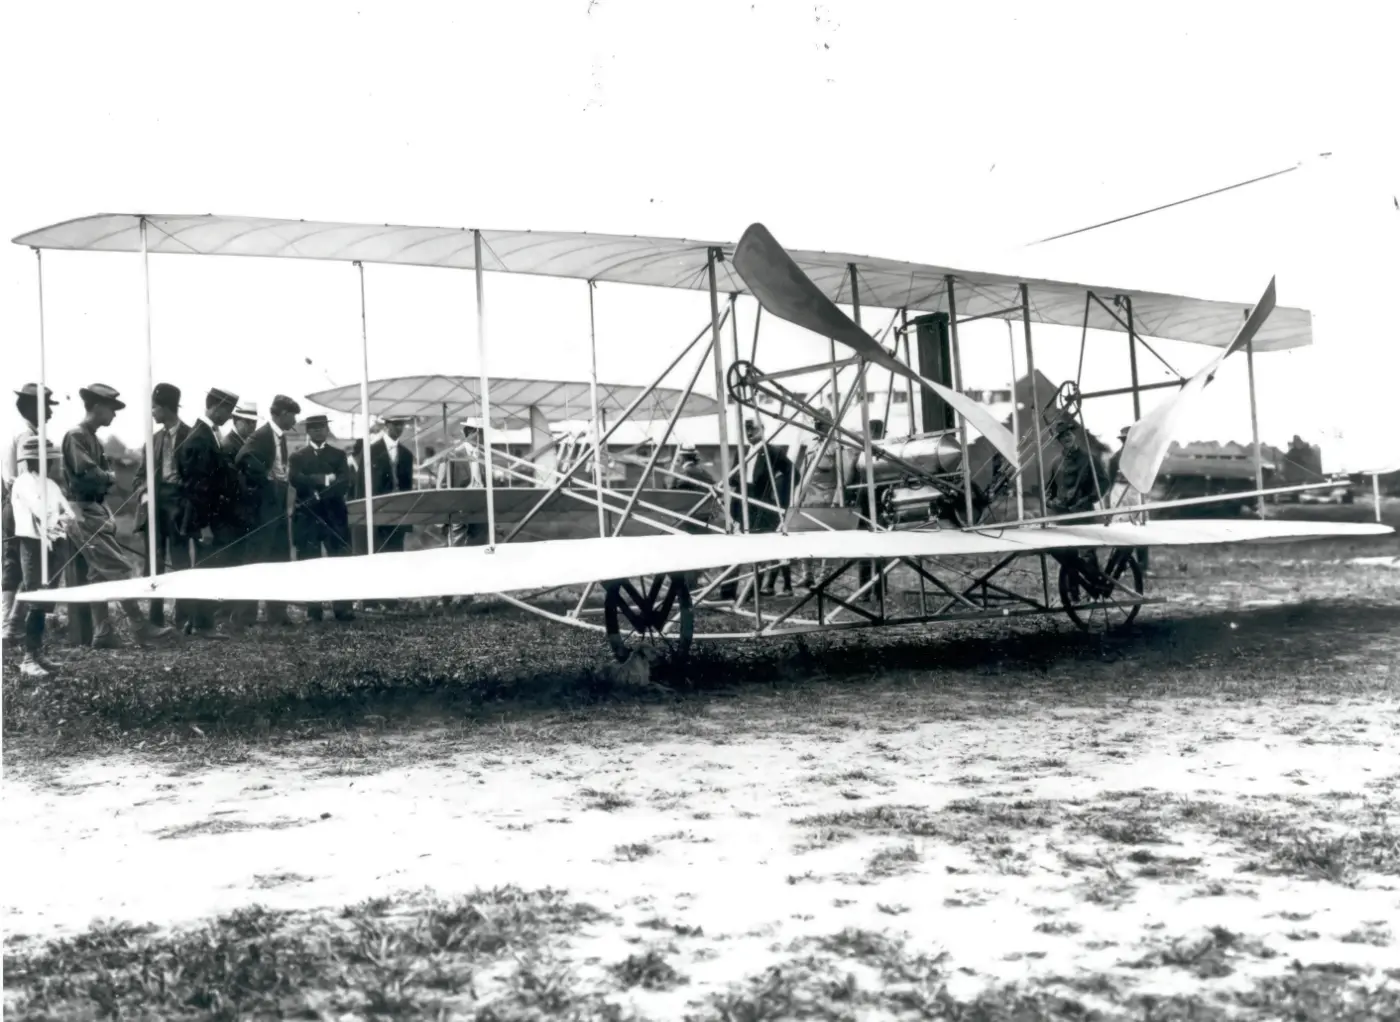 When was the airplane invented? The Wright brothers invented the first aircraft in 1903.